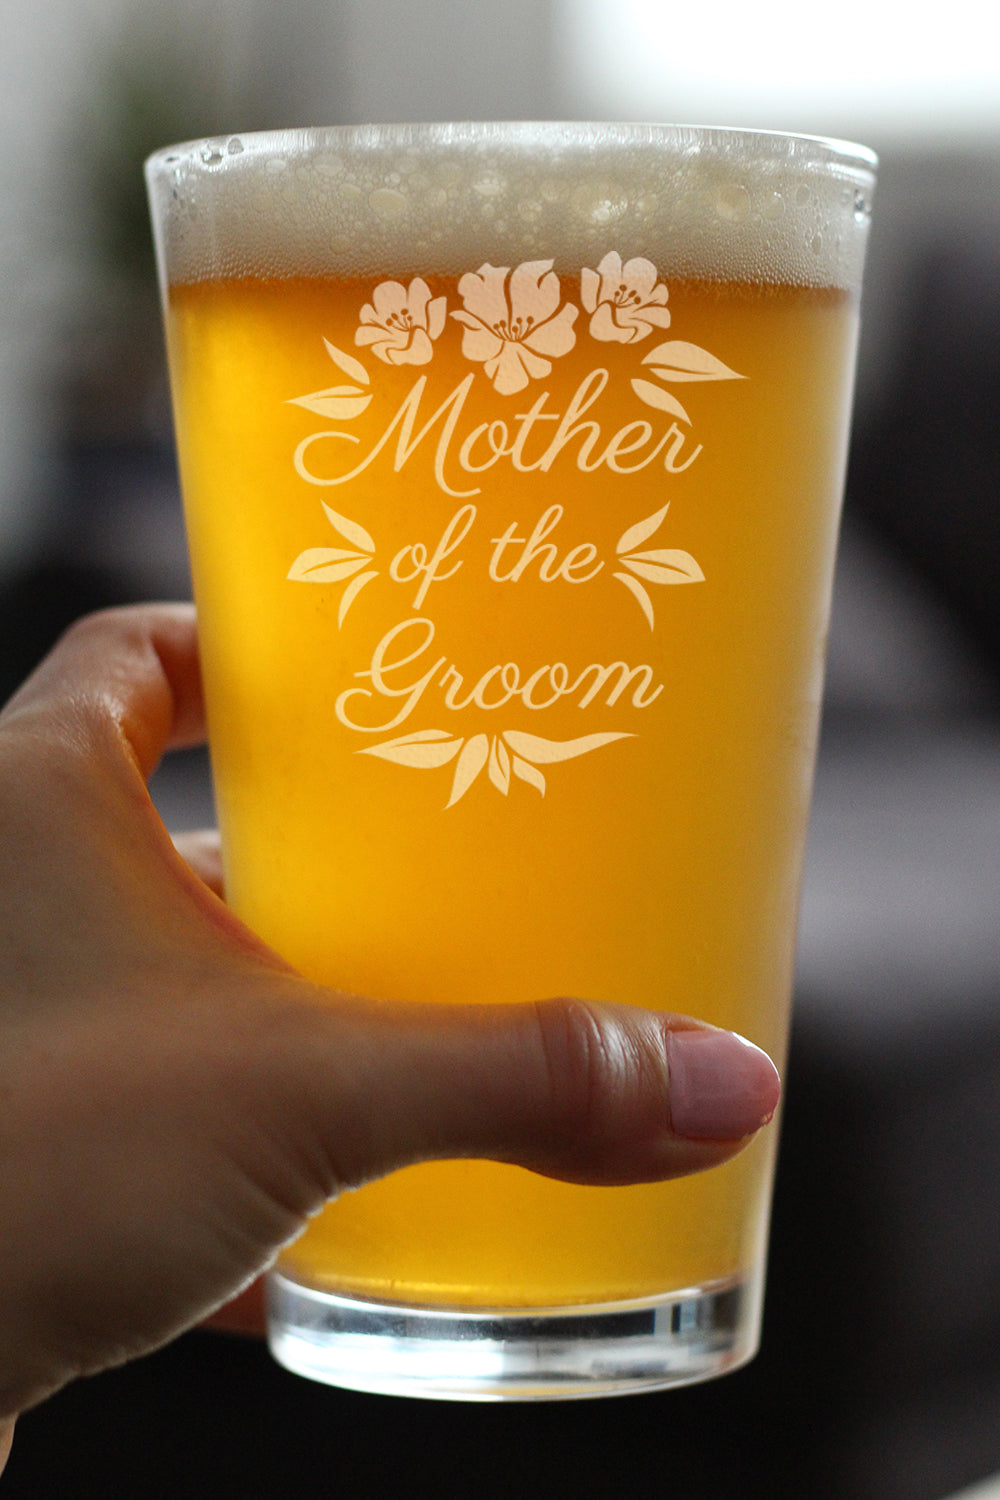 Mother of the Groom Pint Glass - Unique Wedding Gift for Soon to Be Mother-in-Law - Cute Engraved Wedding Cup Gift